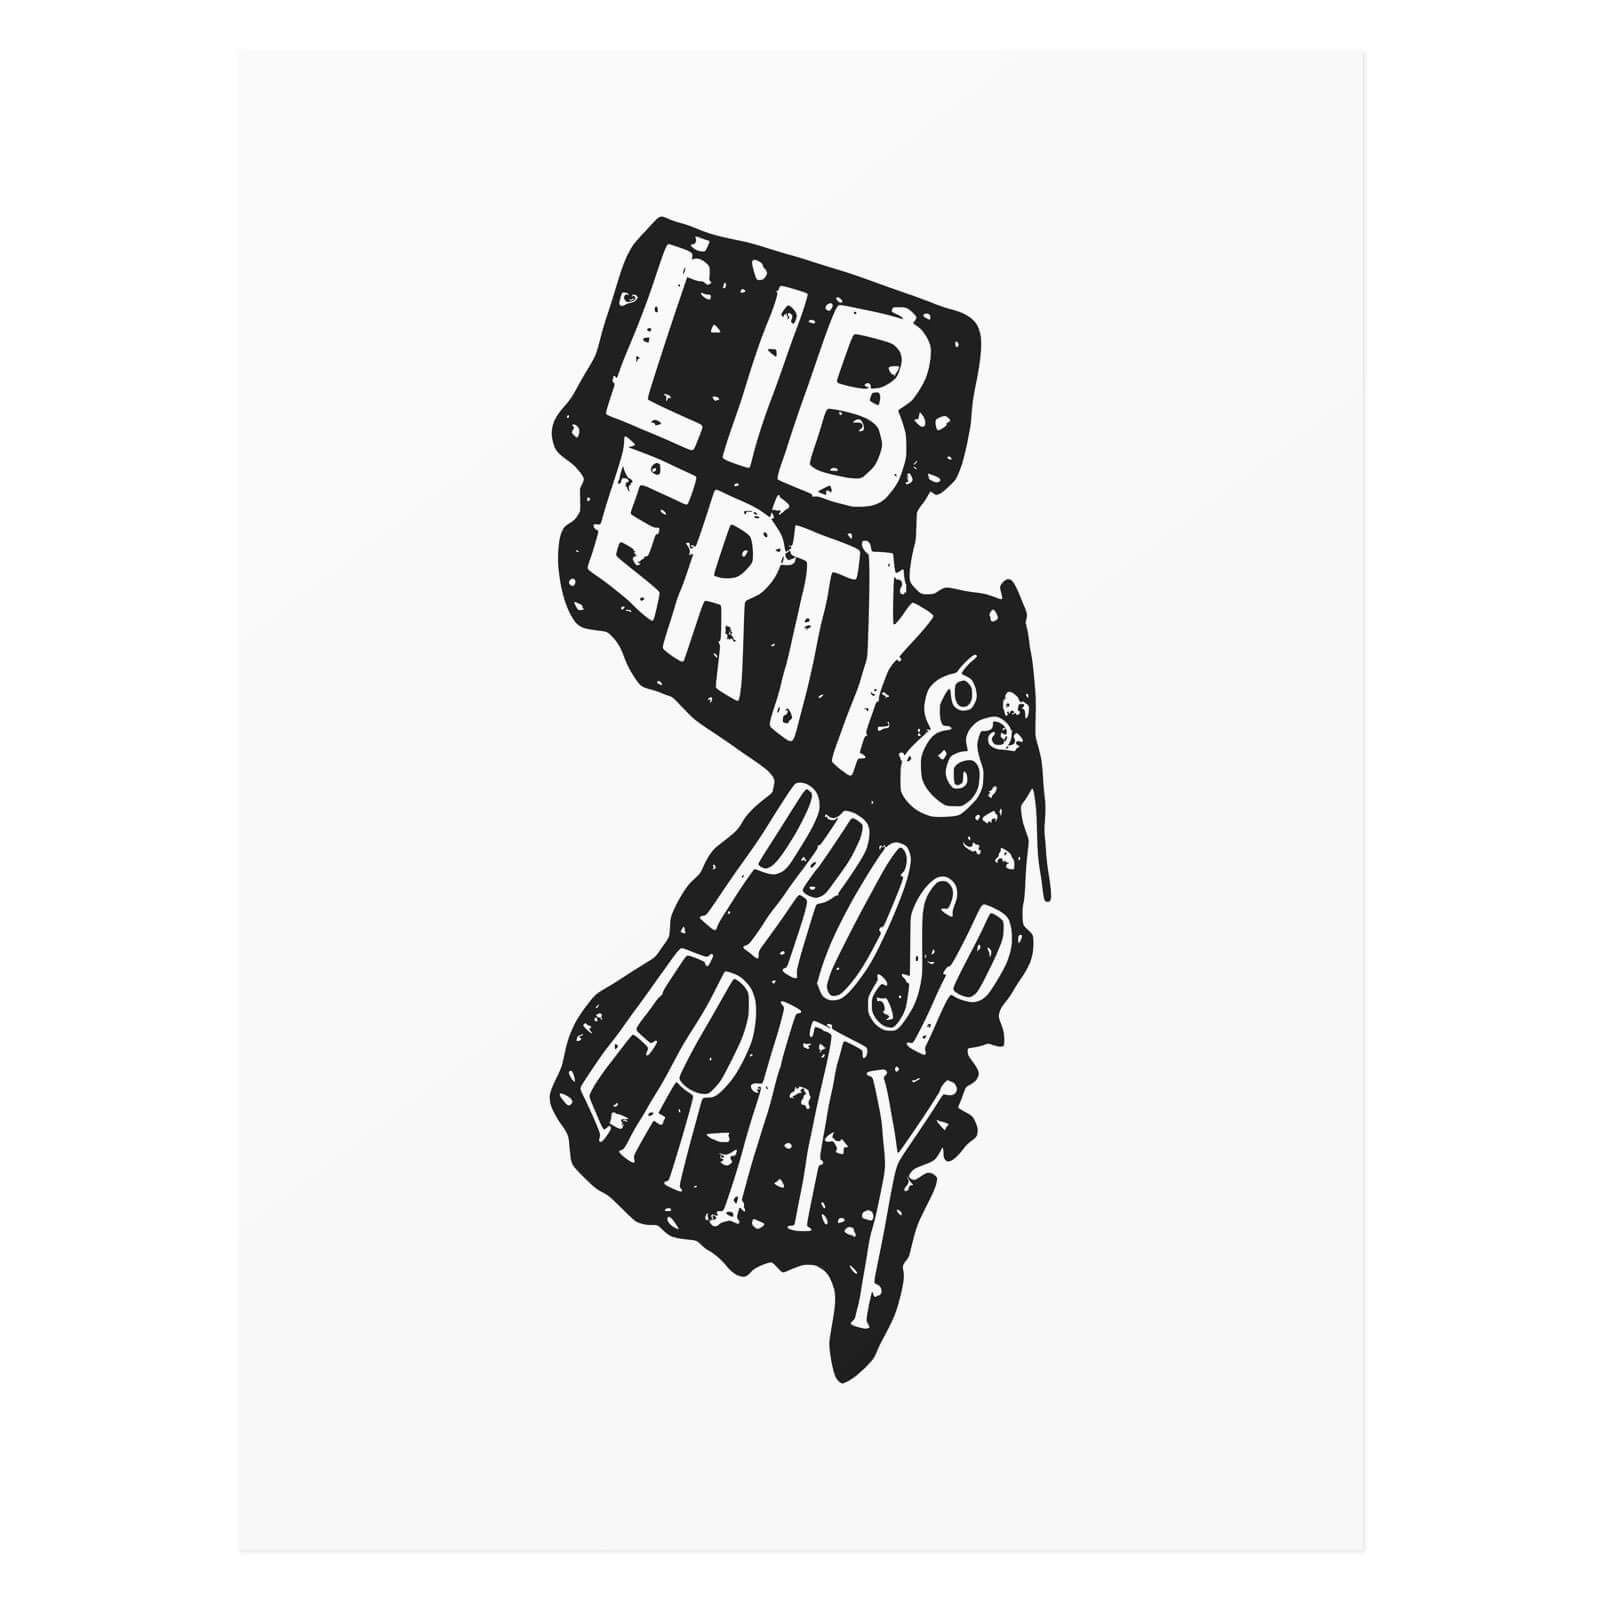 New Jersey — Liberty and prosperity